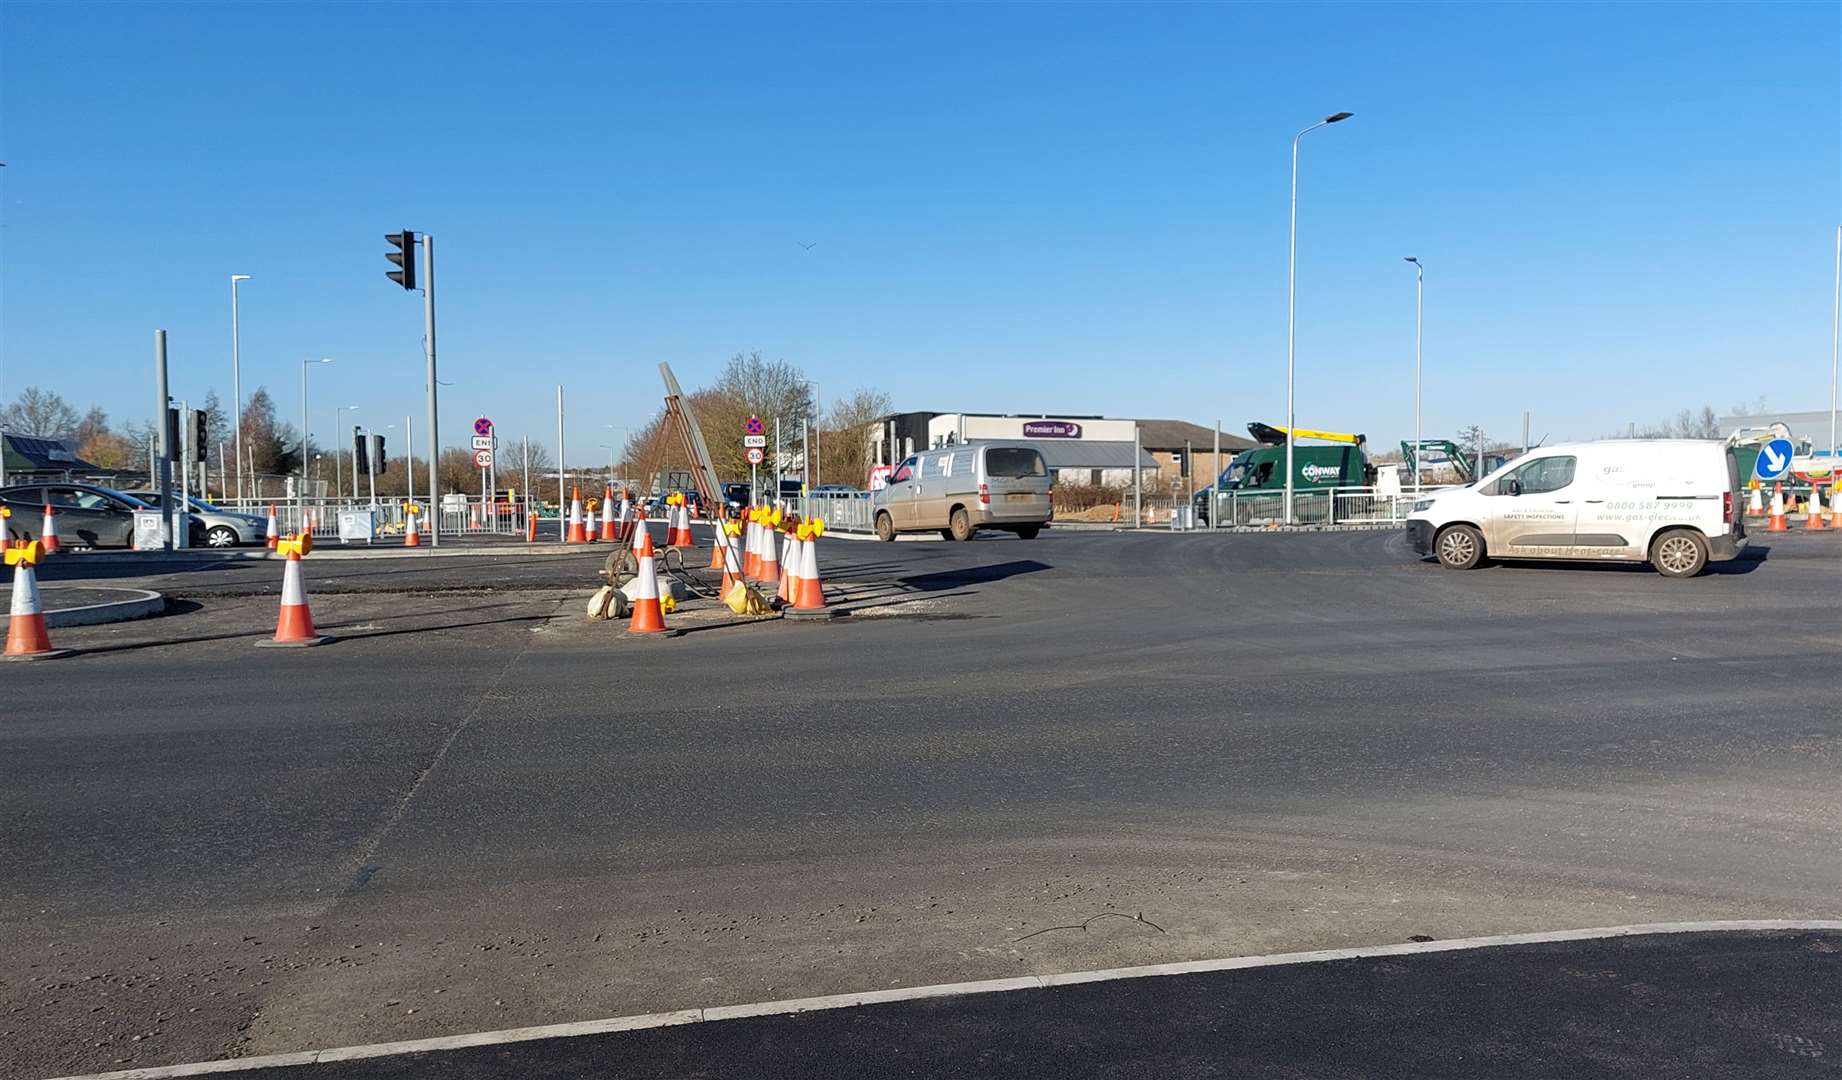 How the 'Bellamy Gurner' junction on the A2070 currently looks